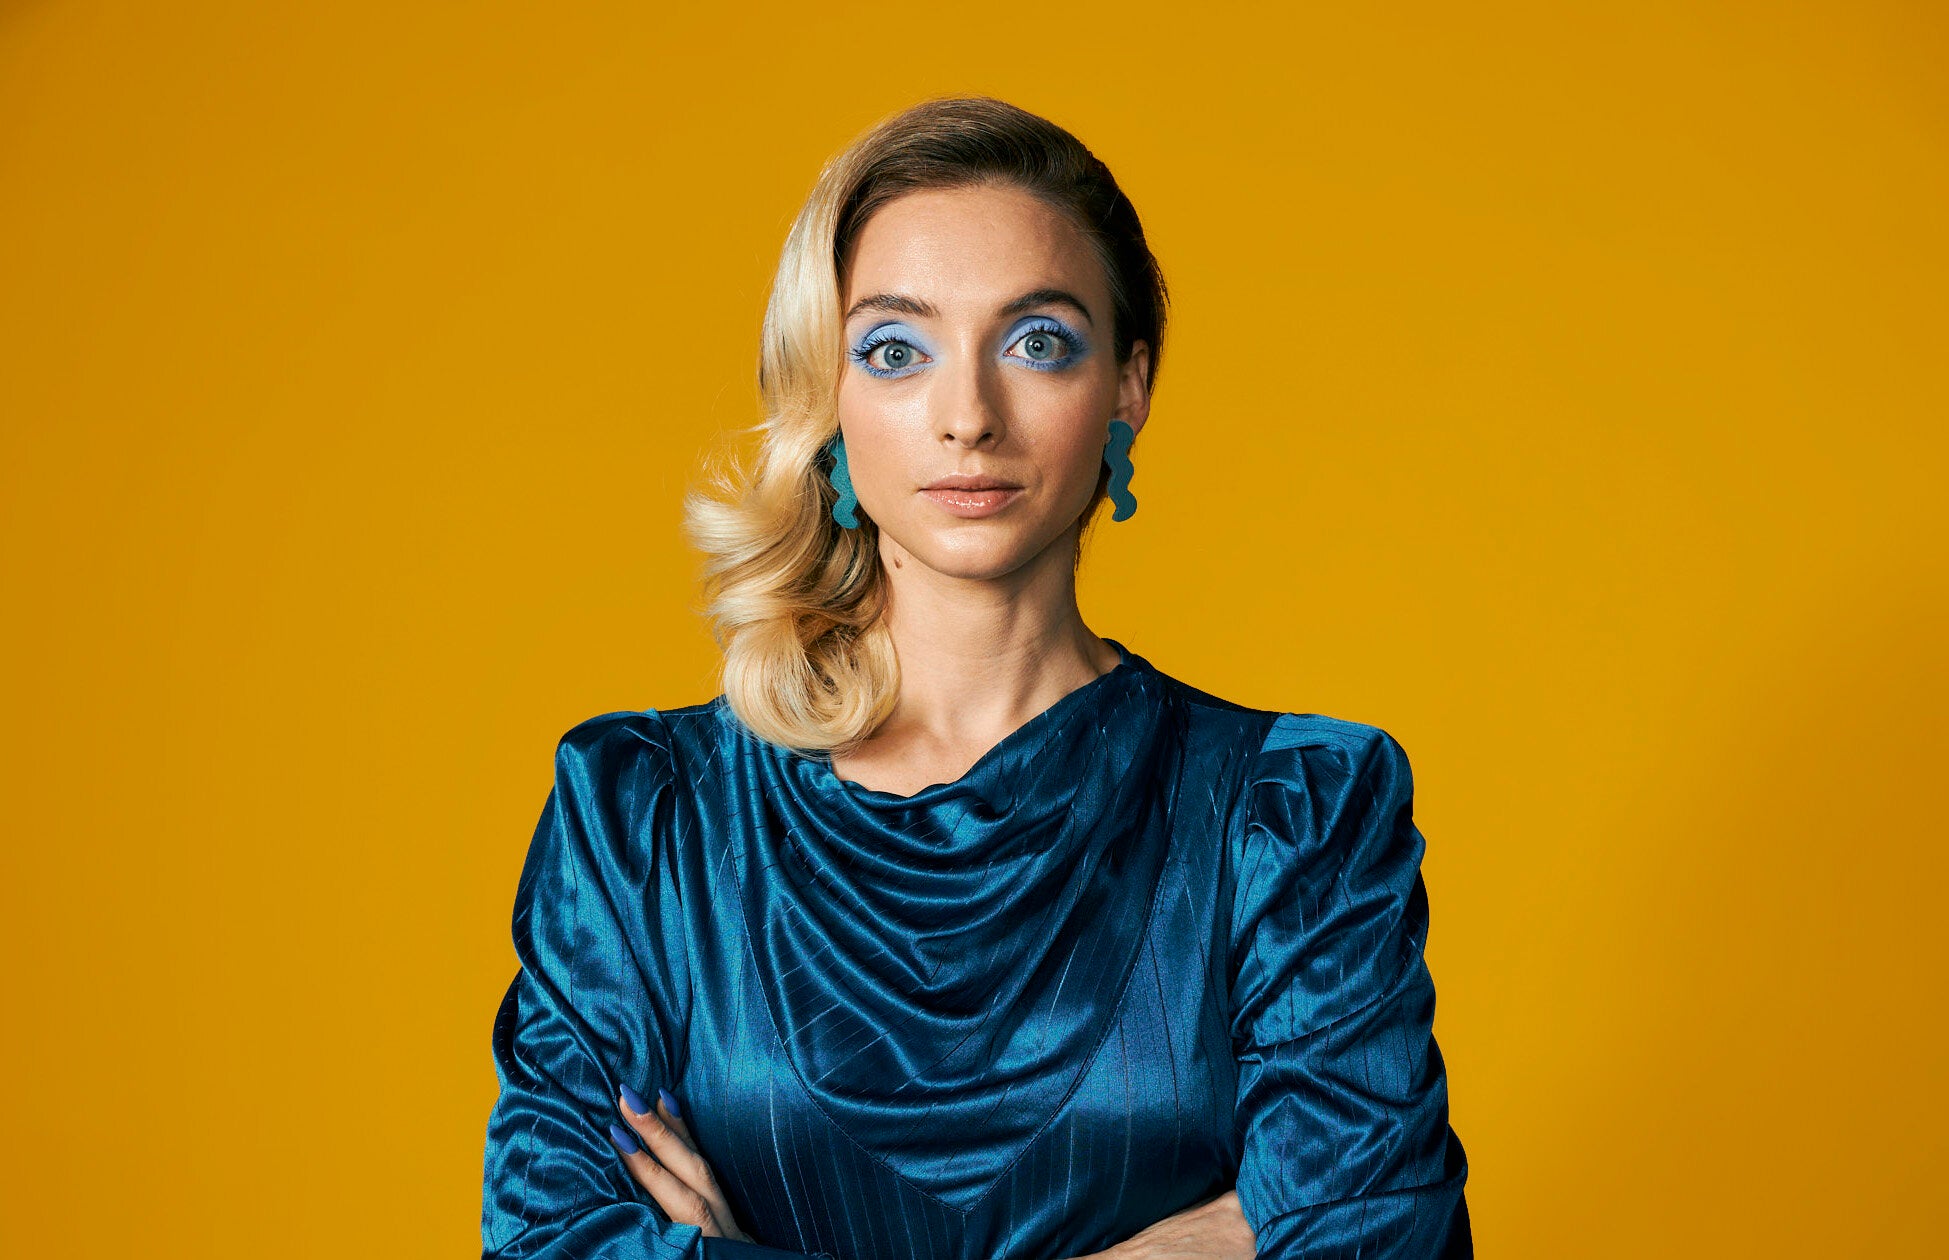 a blonde woman wearing a vintage draped turquoise dress with lightning bolt earrings in turquoise.